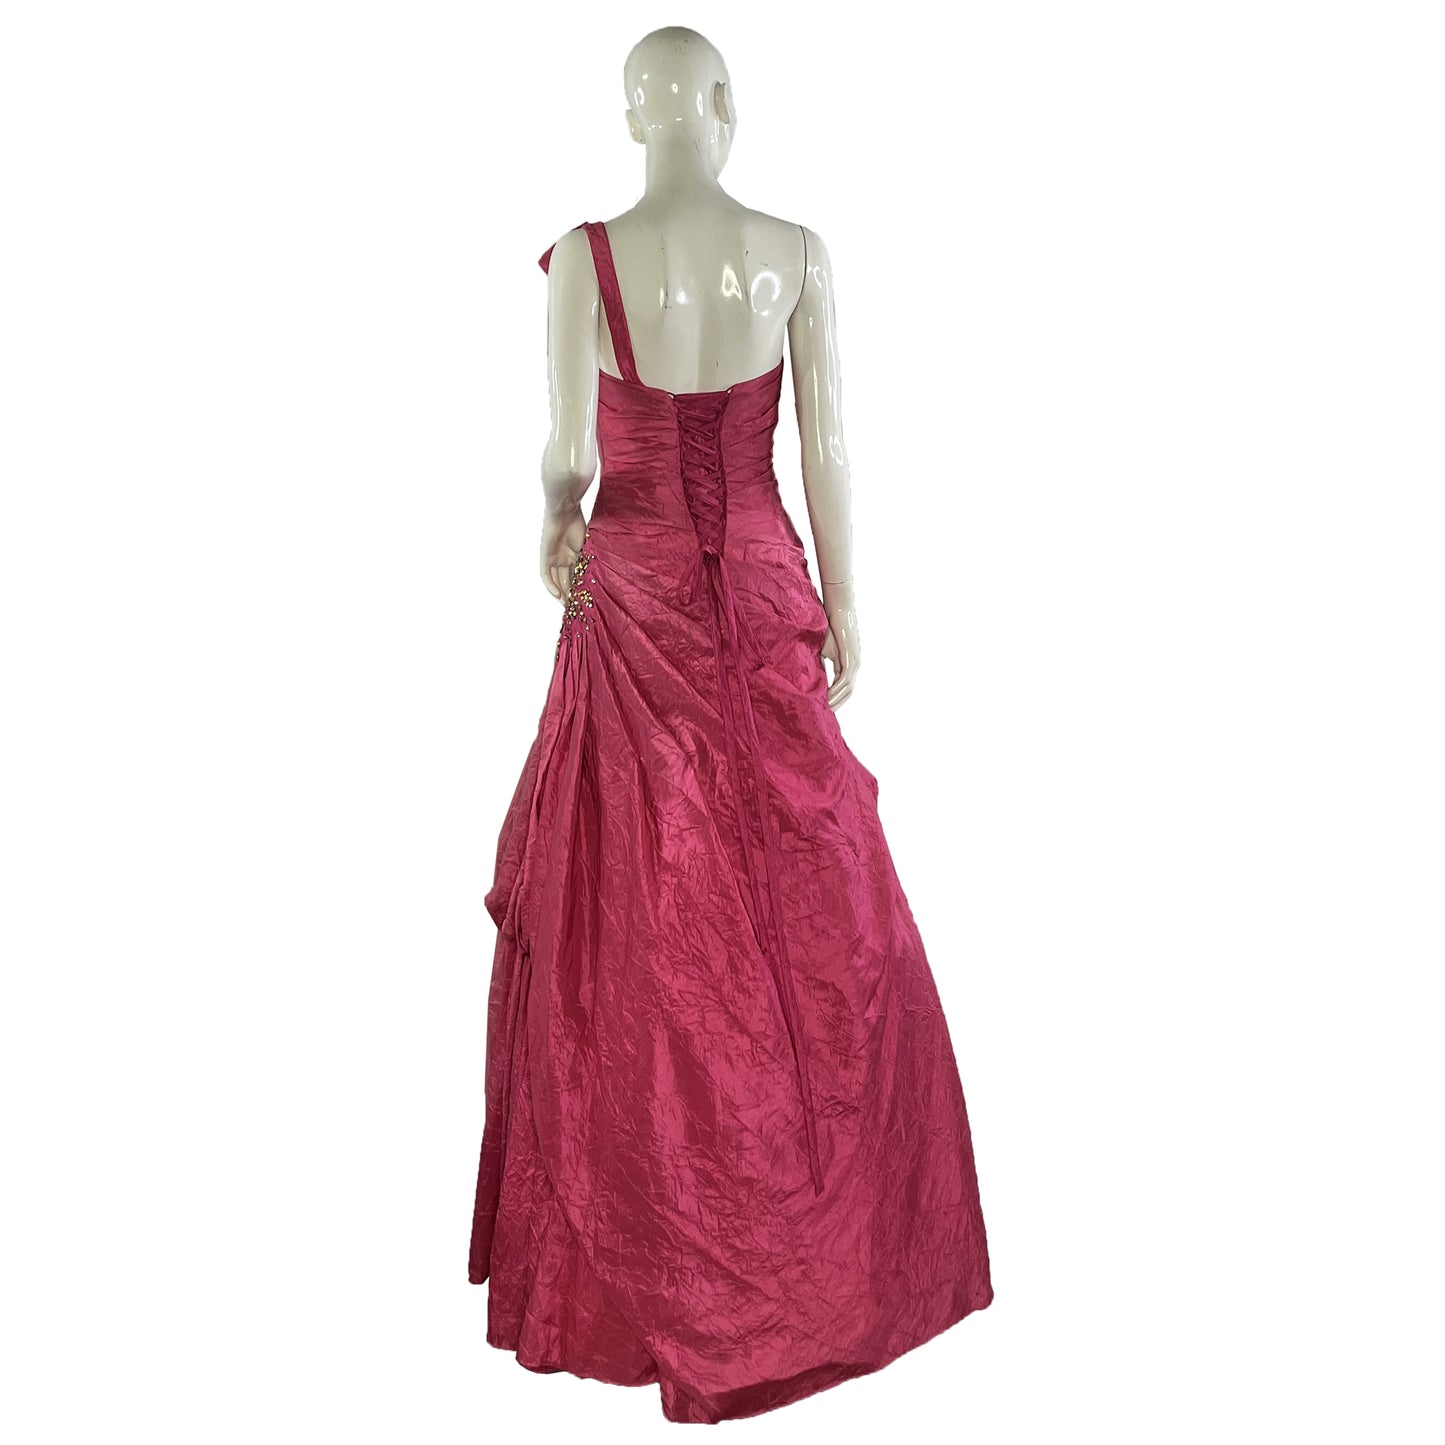 B'Dazzle Ball Gown One-Shoulder Lace-Up Embellished Pink Size 8 SKU 000404-1